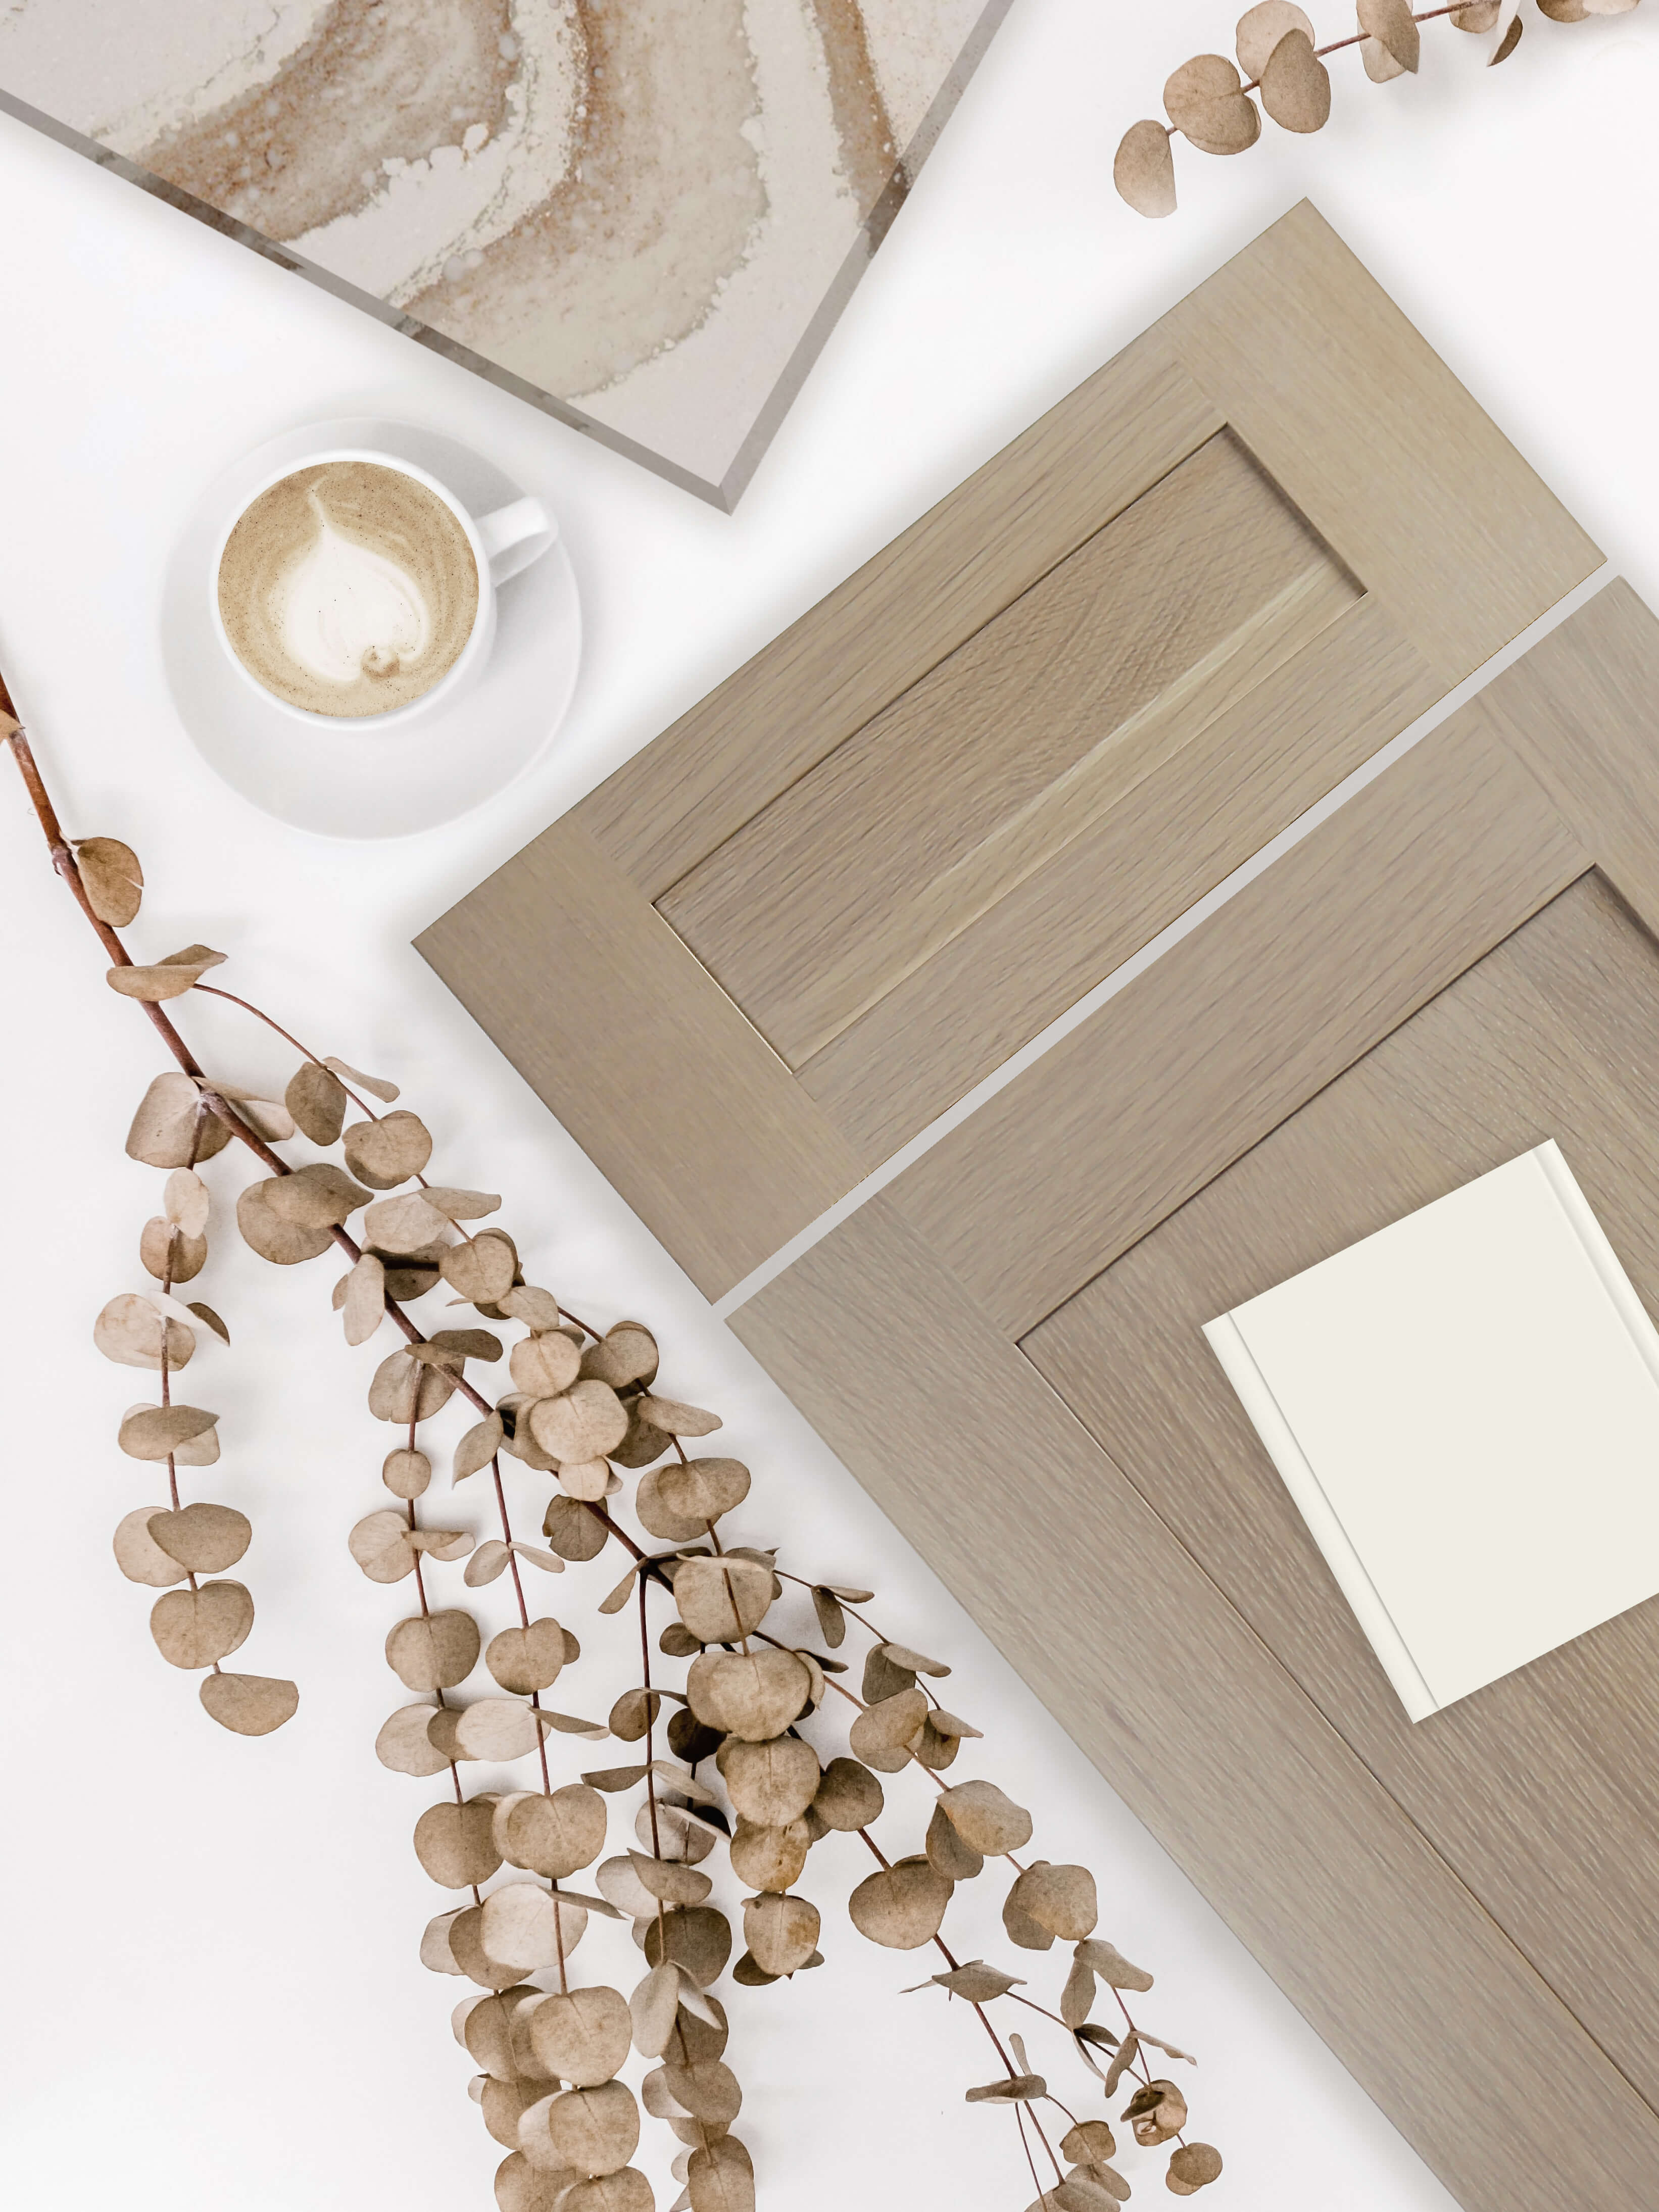 Soft brown hues and wood textures for cabinetry inspired by natural elements.